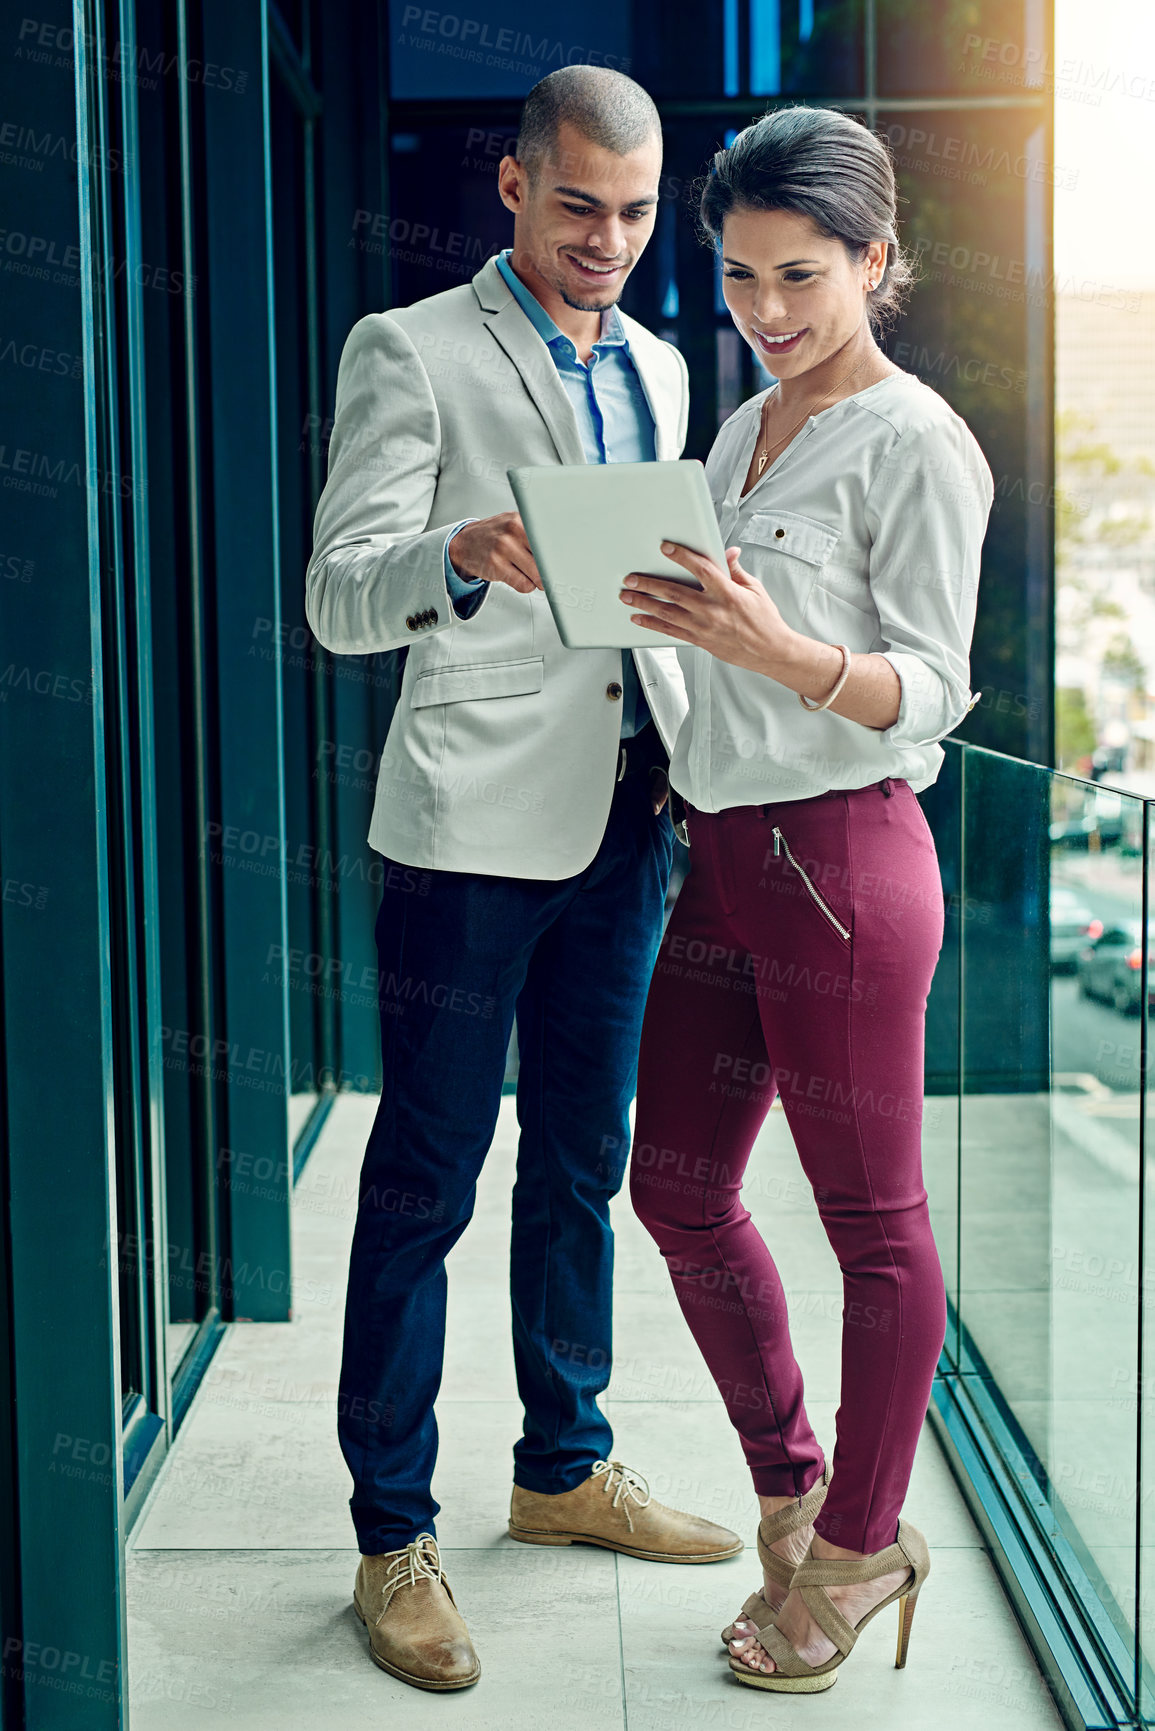 Buy stock photo Shot of two young coworkers using a digital tablet together at work